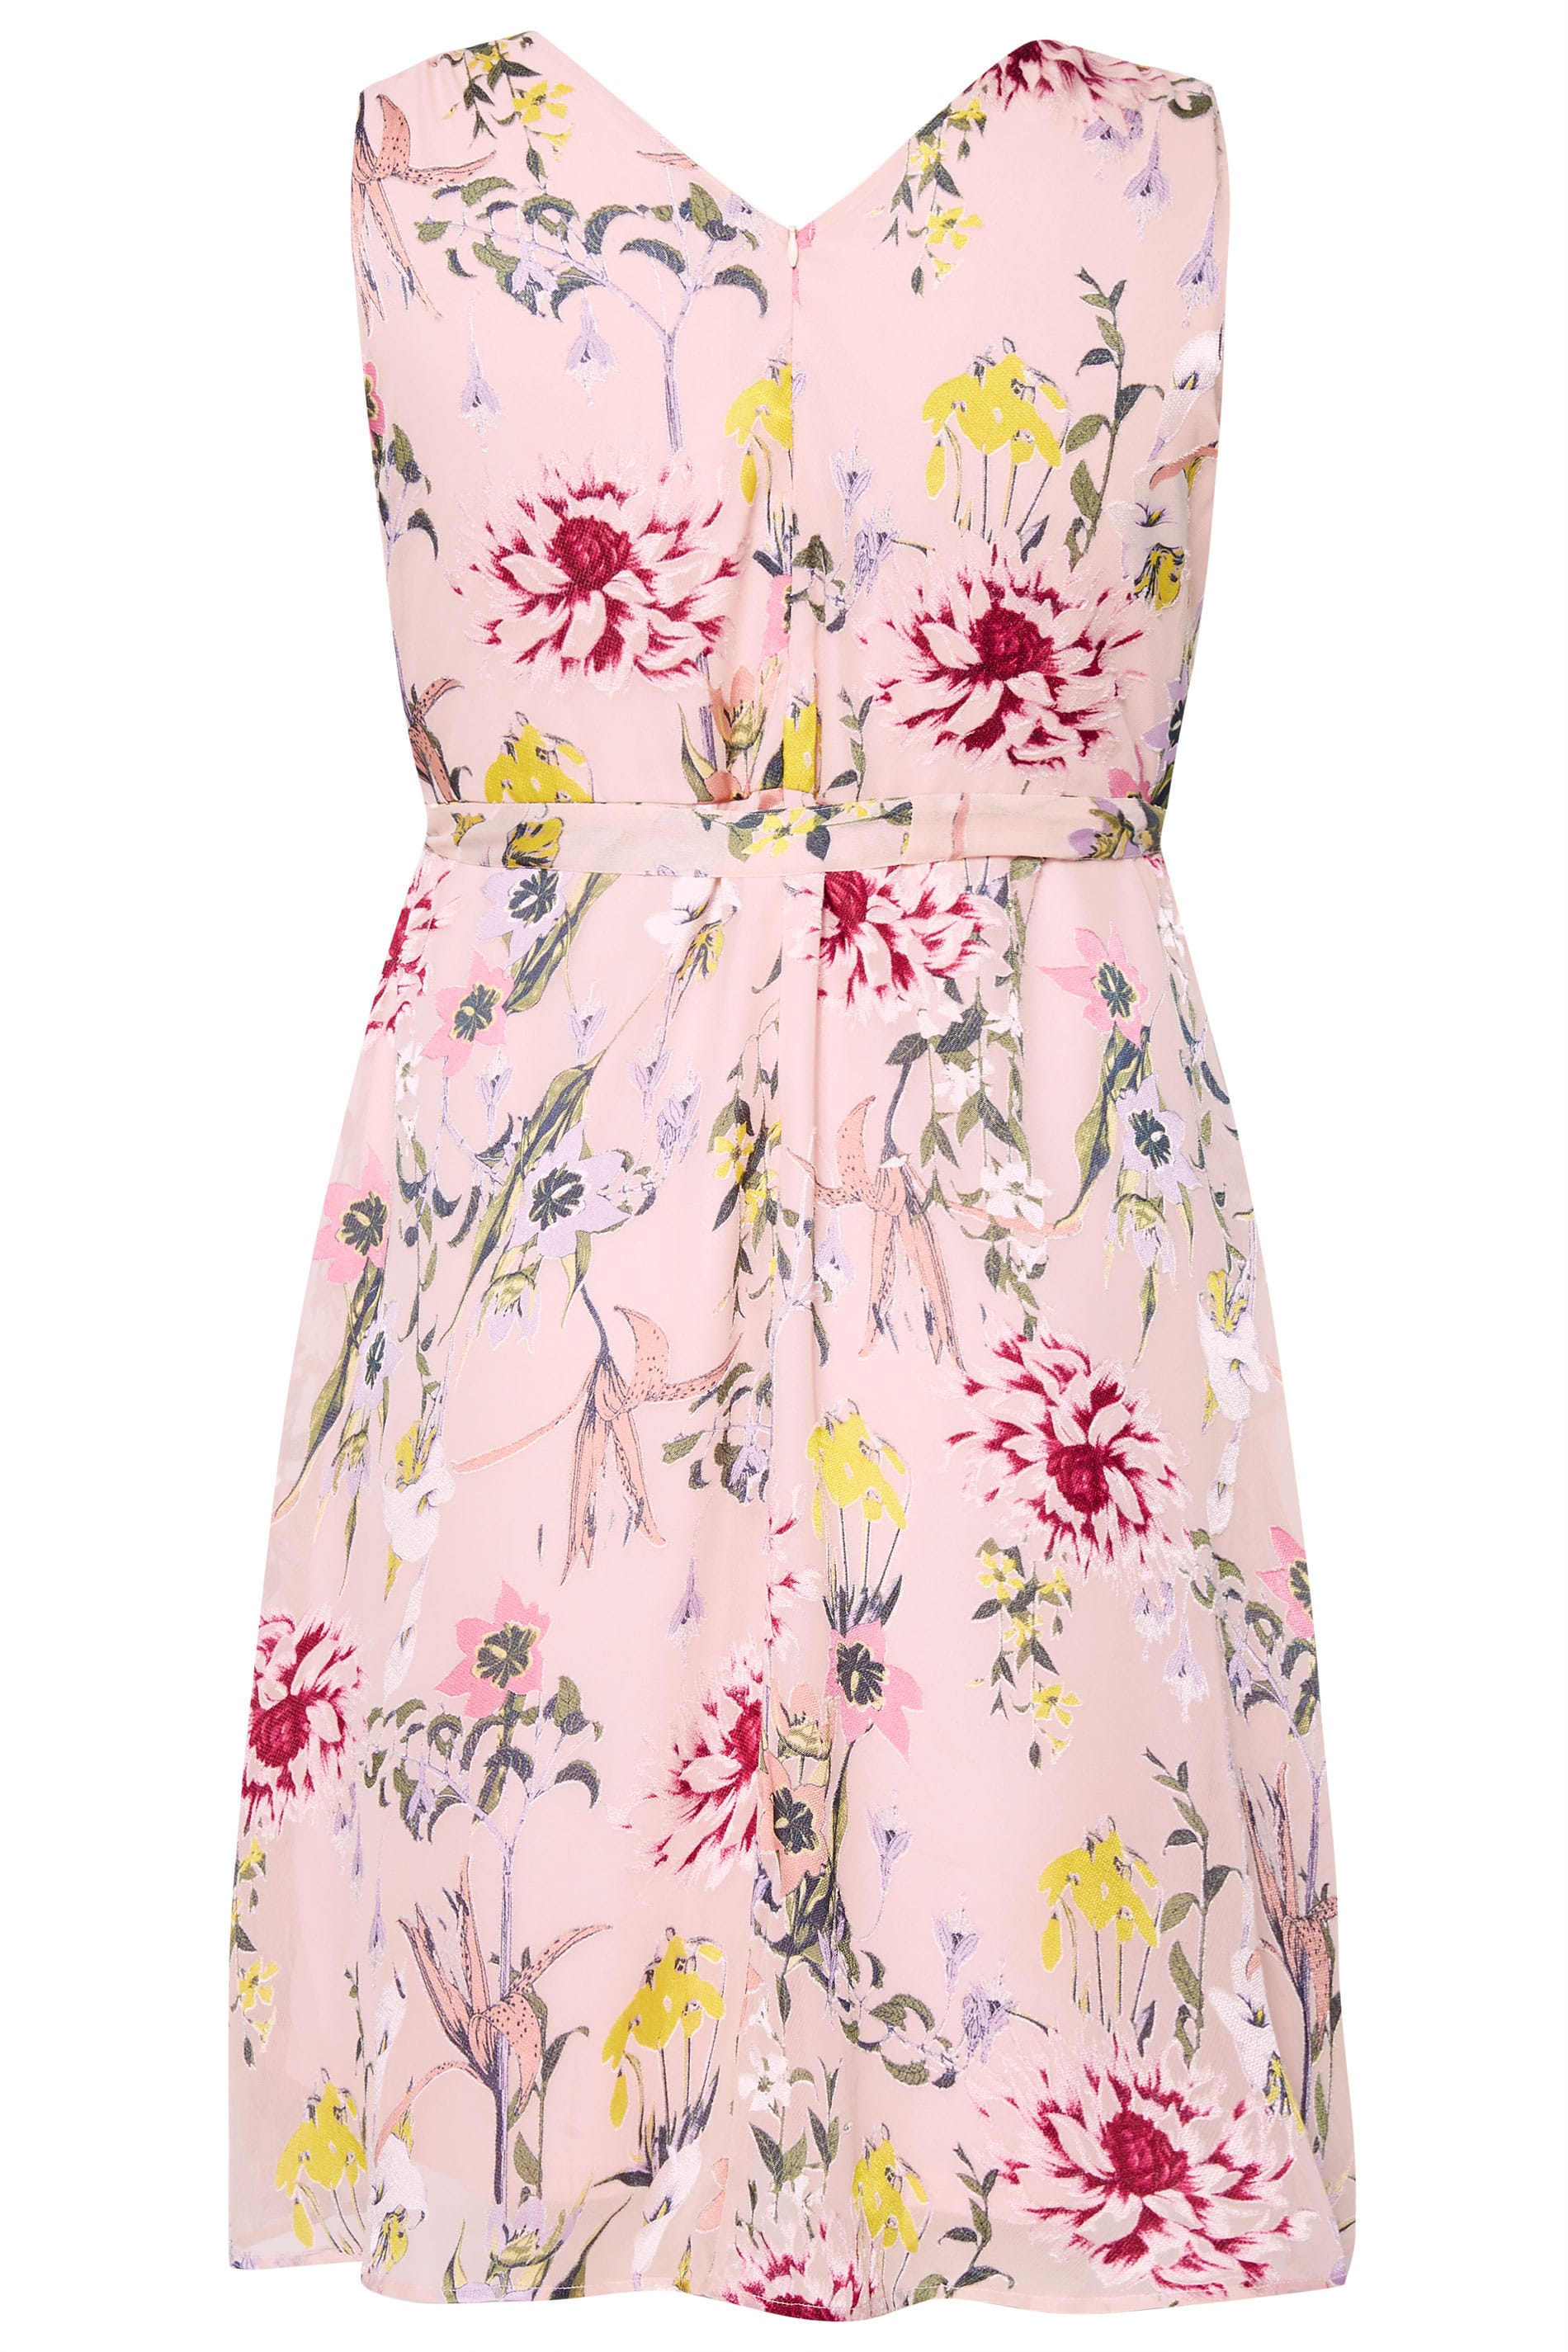 YOURS LONDON Pink Floral Wrap Dress | Plus Sizes 16 to 36 | Yours Clothing